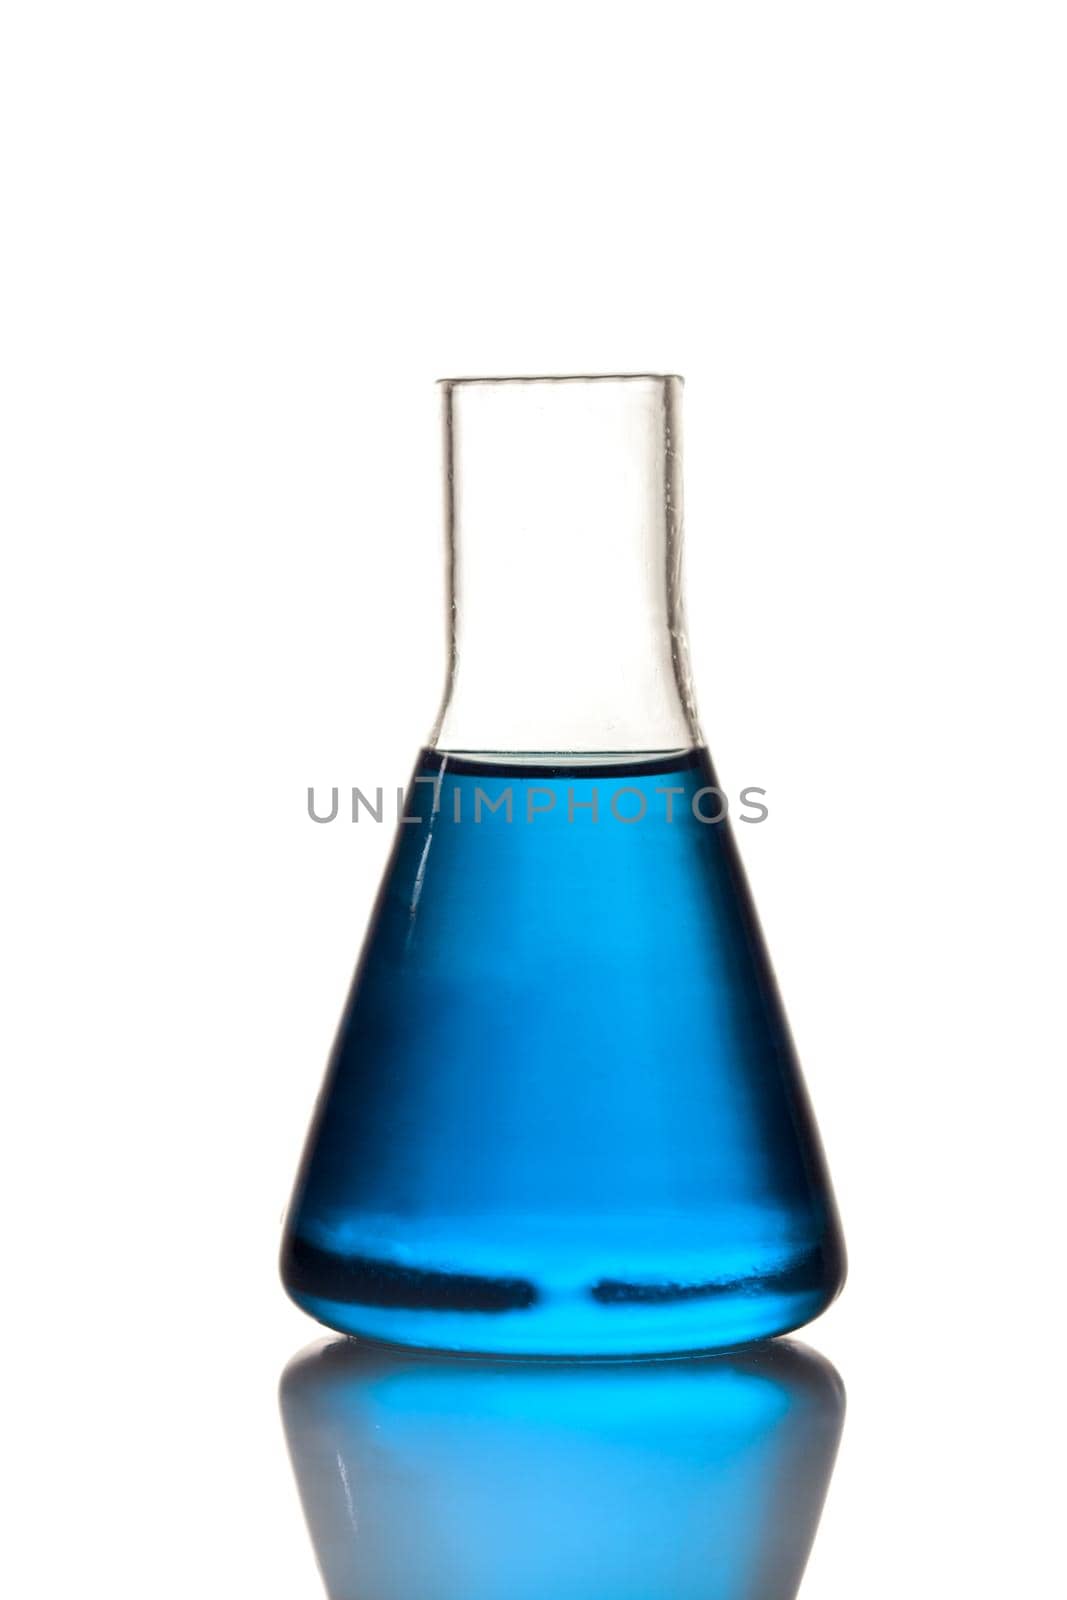 The conical flask with blue liquid on white - laboratory glass